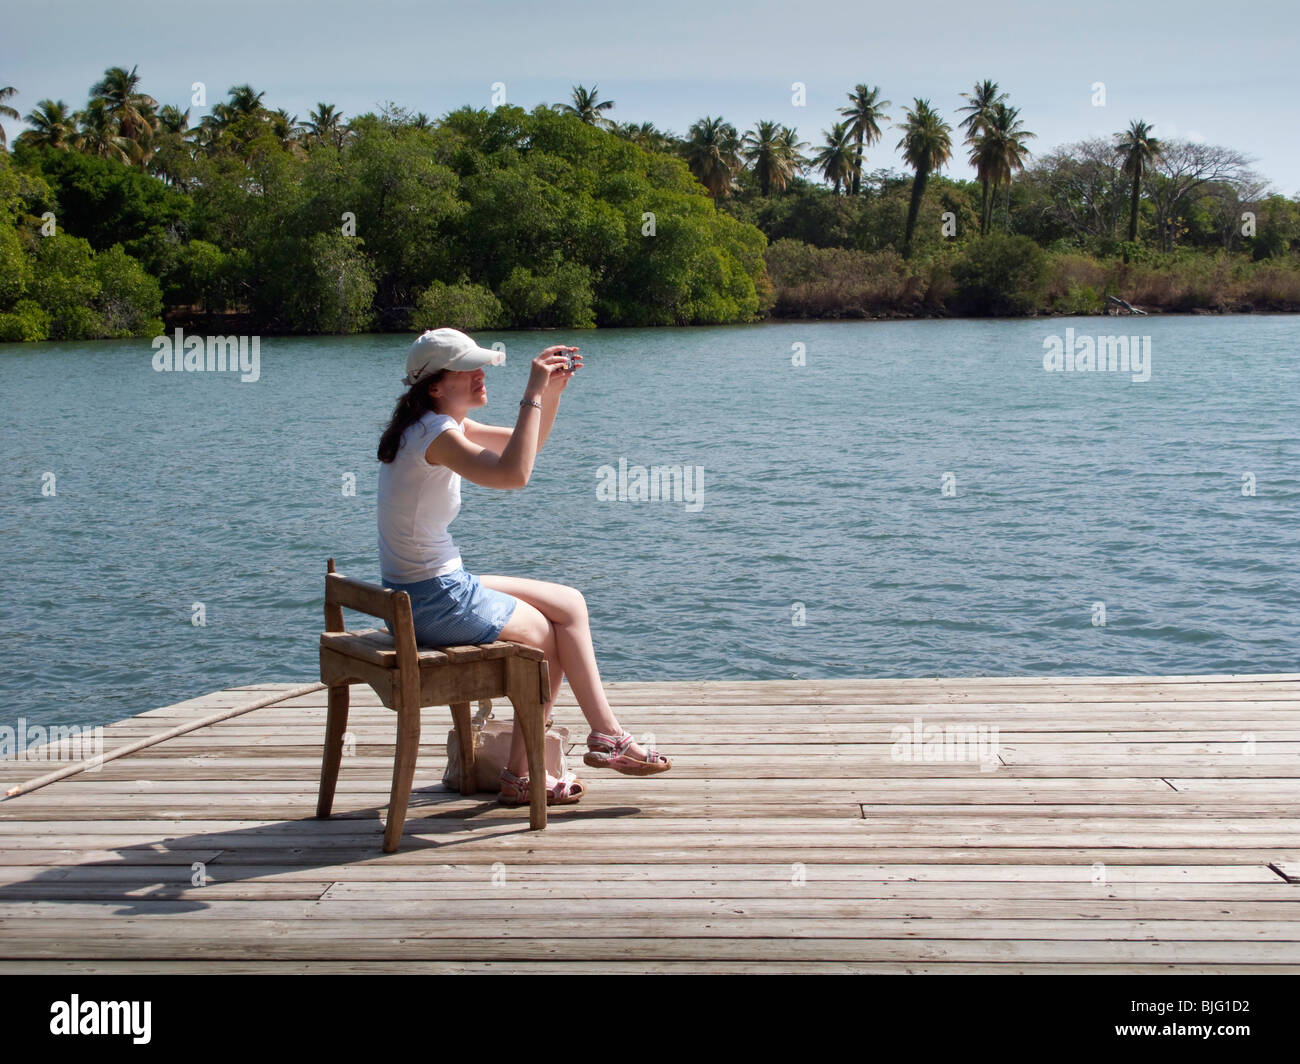 Girl uses old wooden seat on a jetty as support whilst composing a photograph of the Caribbean coastline with palm tree backdrop Stock Photo